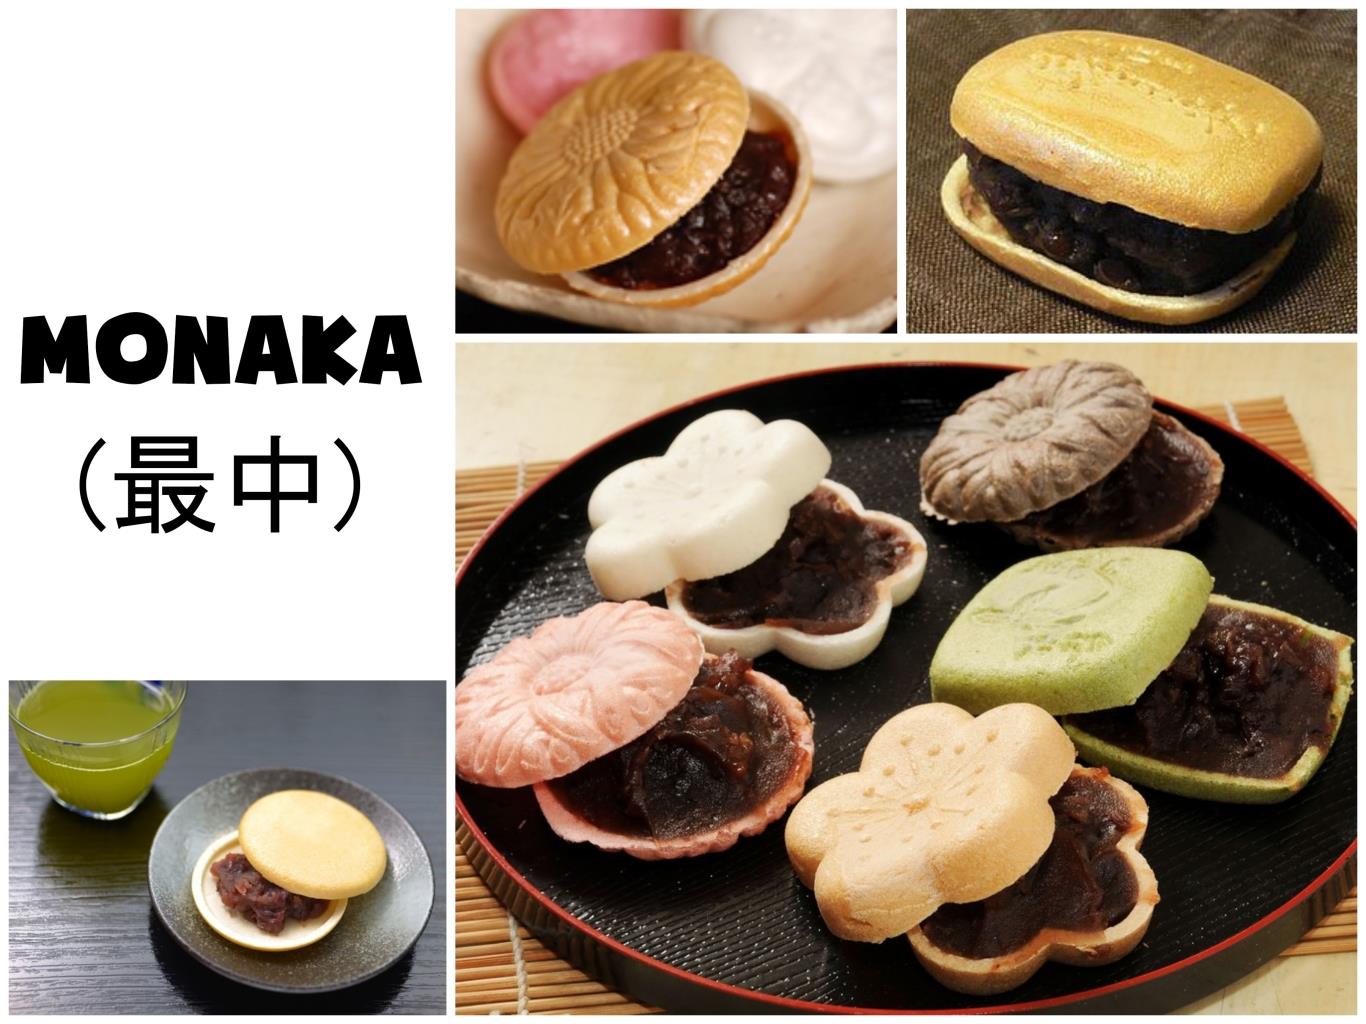 Get to know about Wagashi, the Japanese traditional sweets